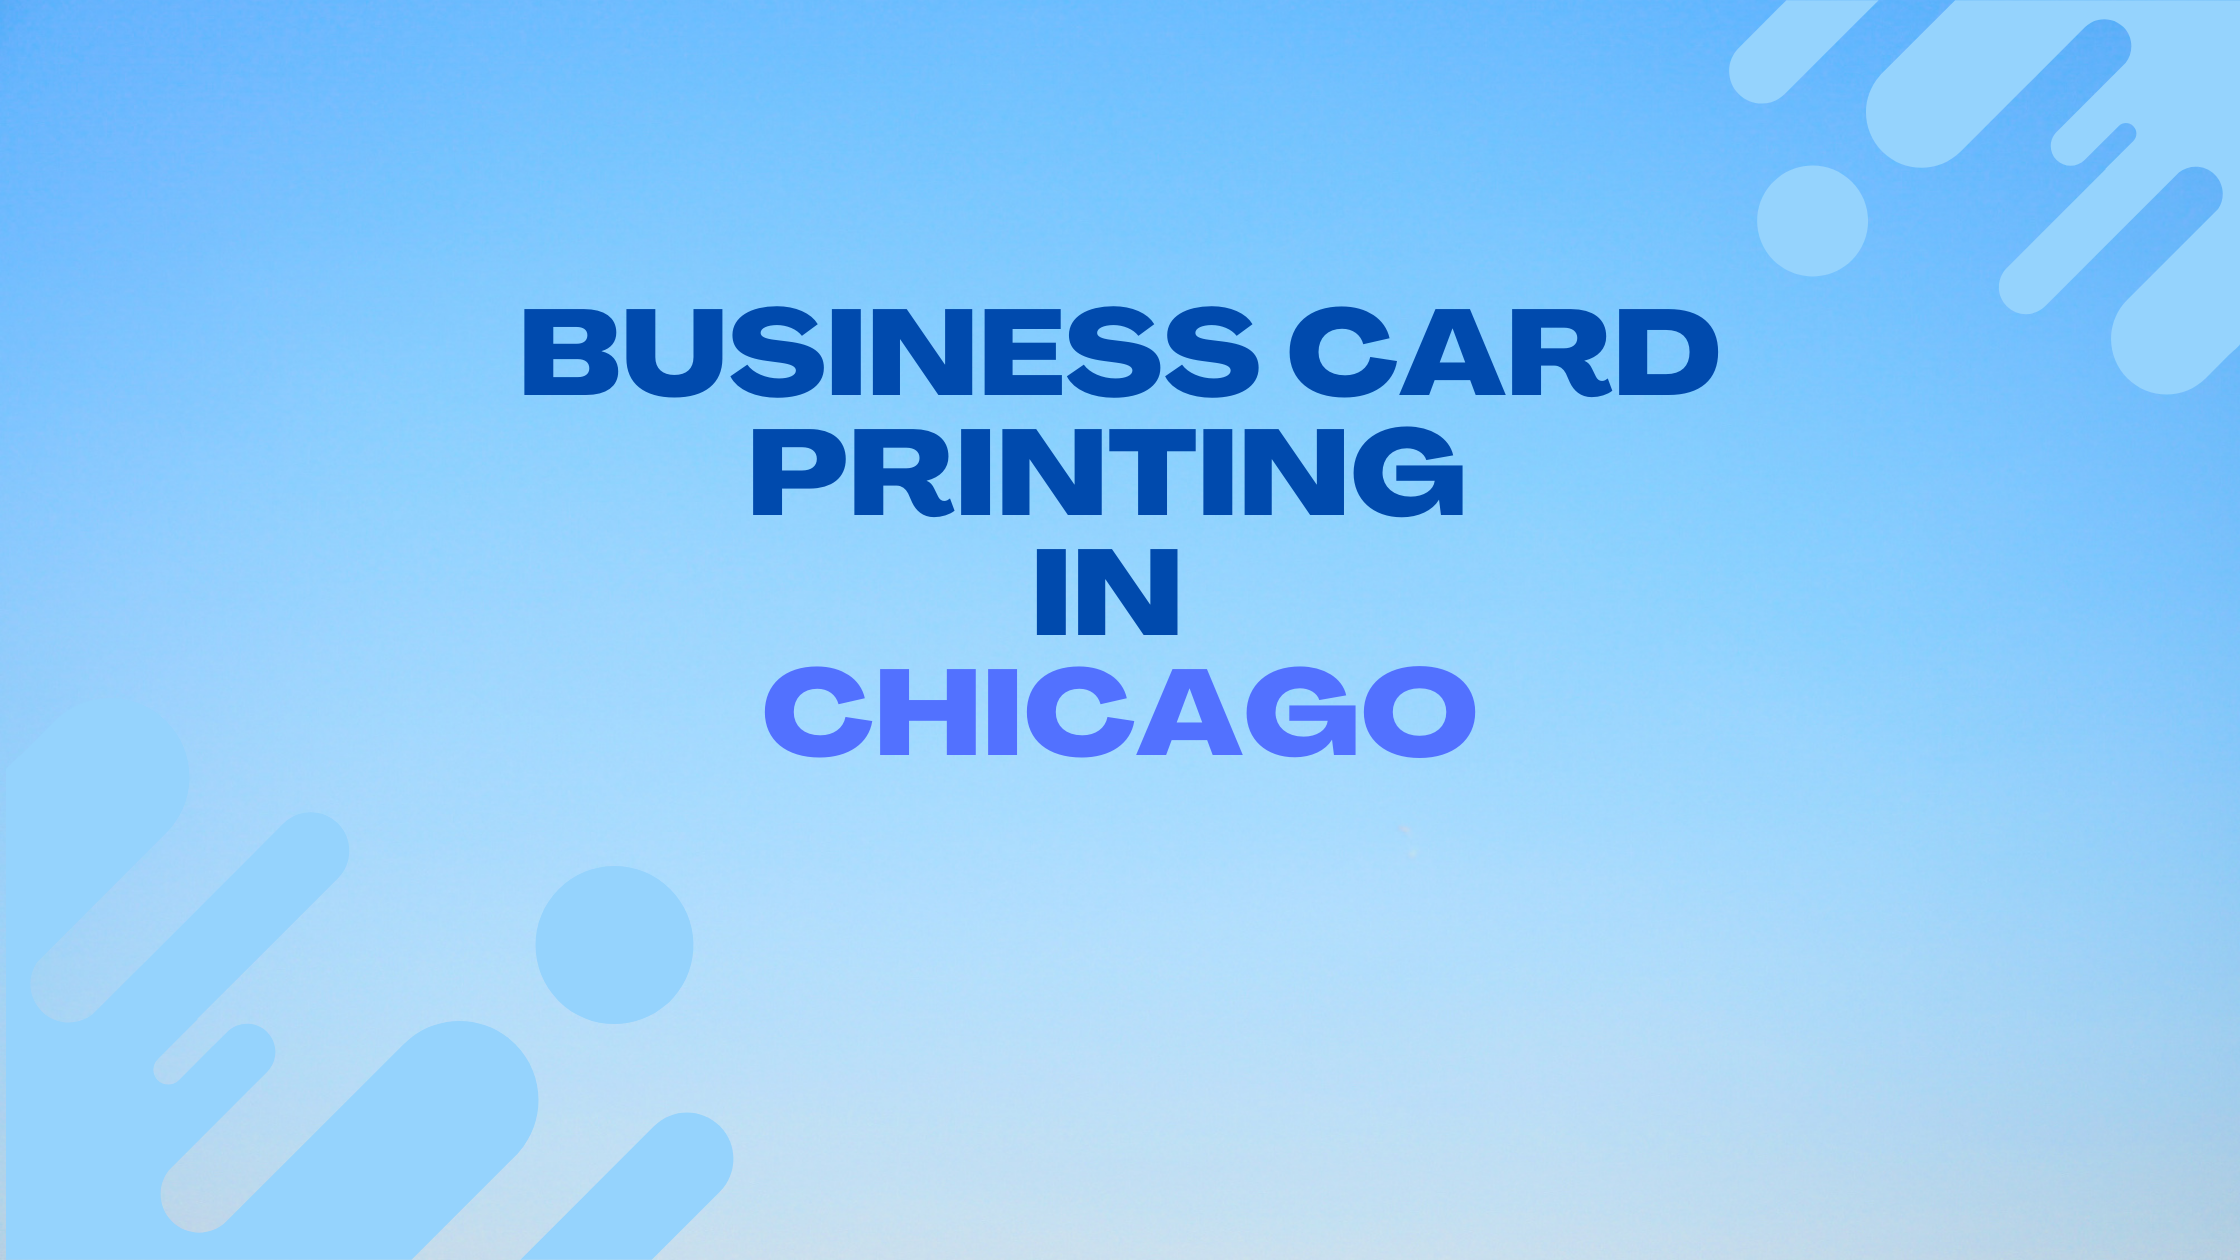 Find Business Card Printing Near Me